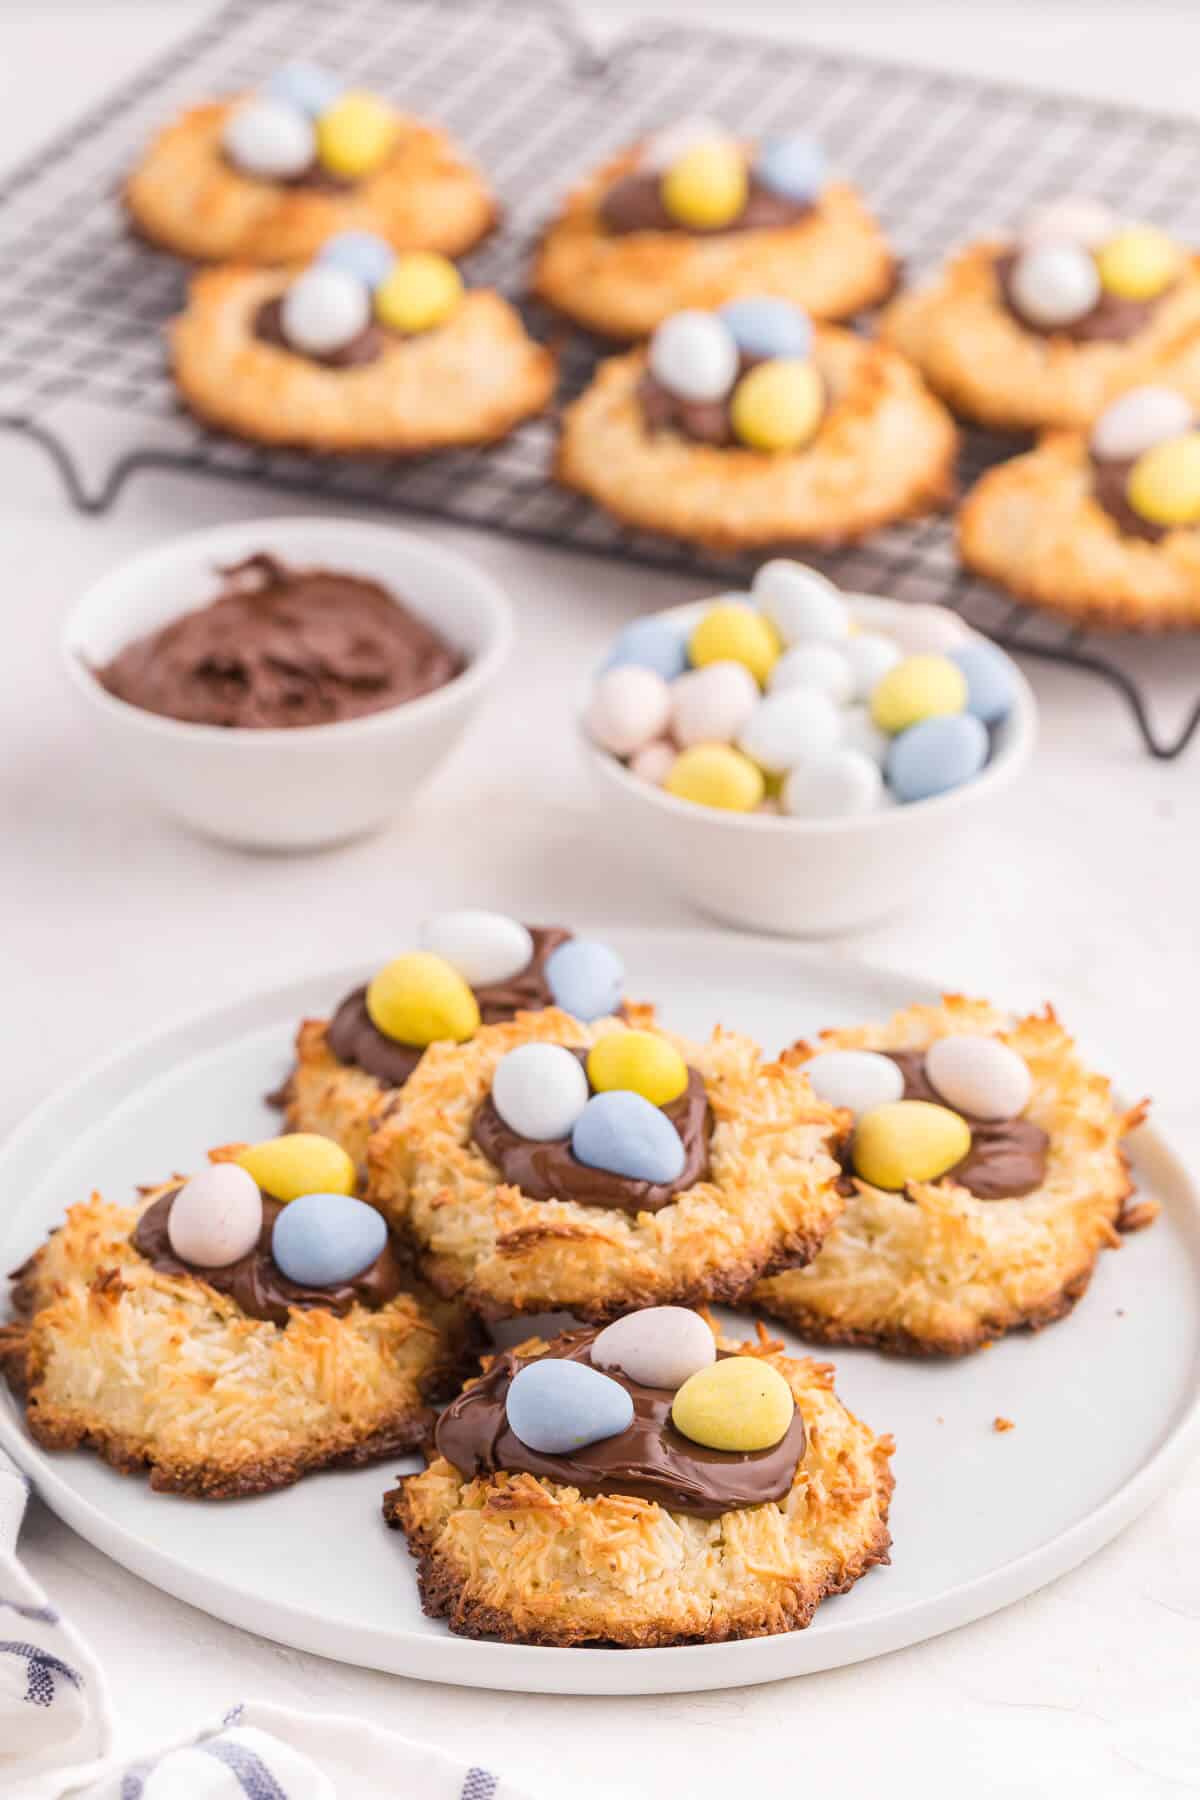 Coconut macaroon nutella cookie nests on a plate.